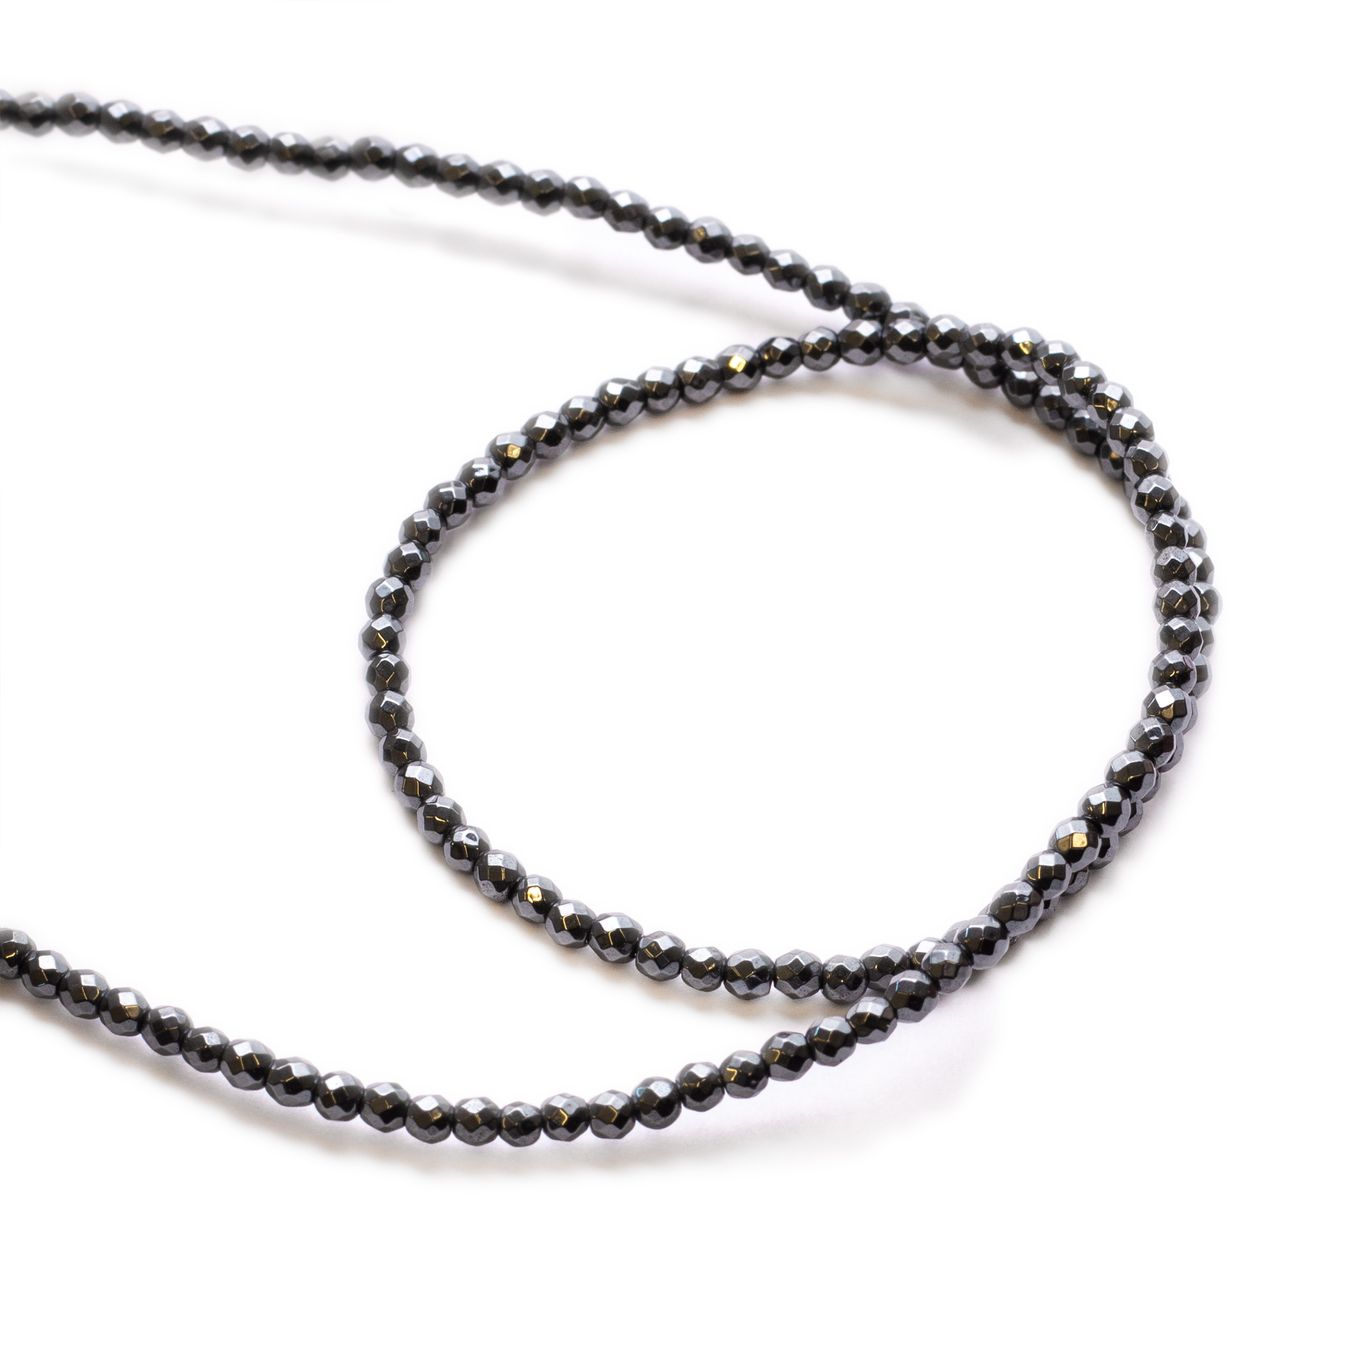 Hematite Faceted Round Beads - Approx 2mm